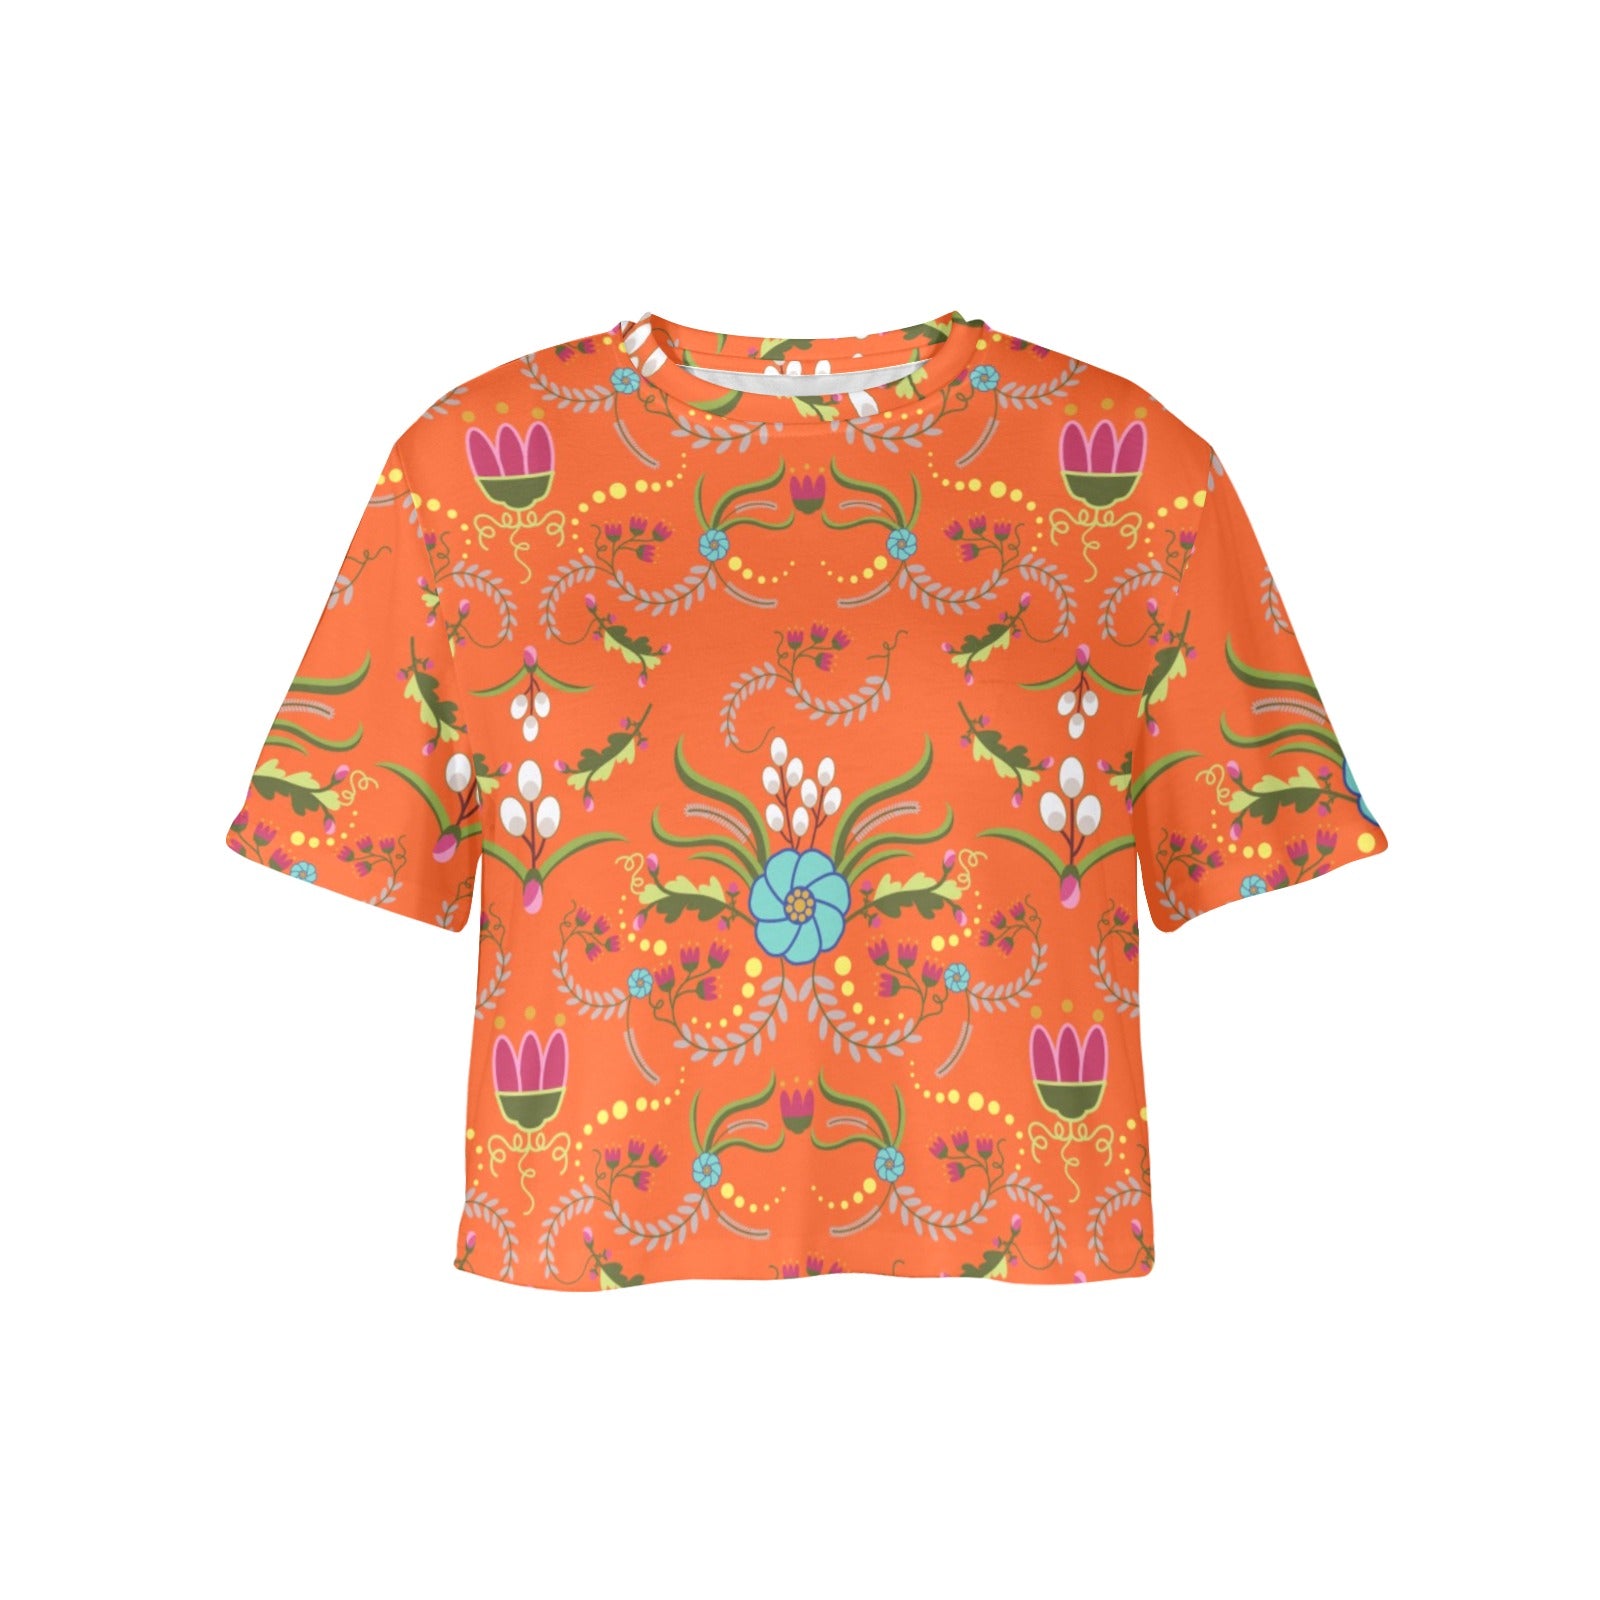 First Bloom Carrots Women's Cropped T-shirt